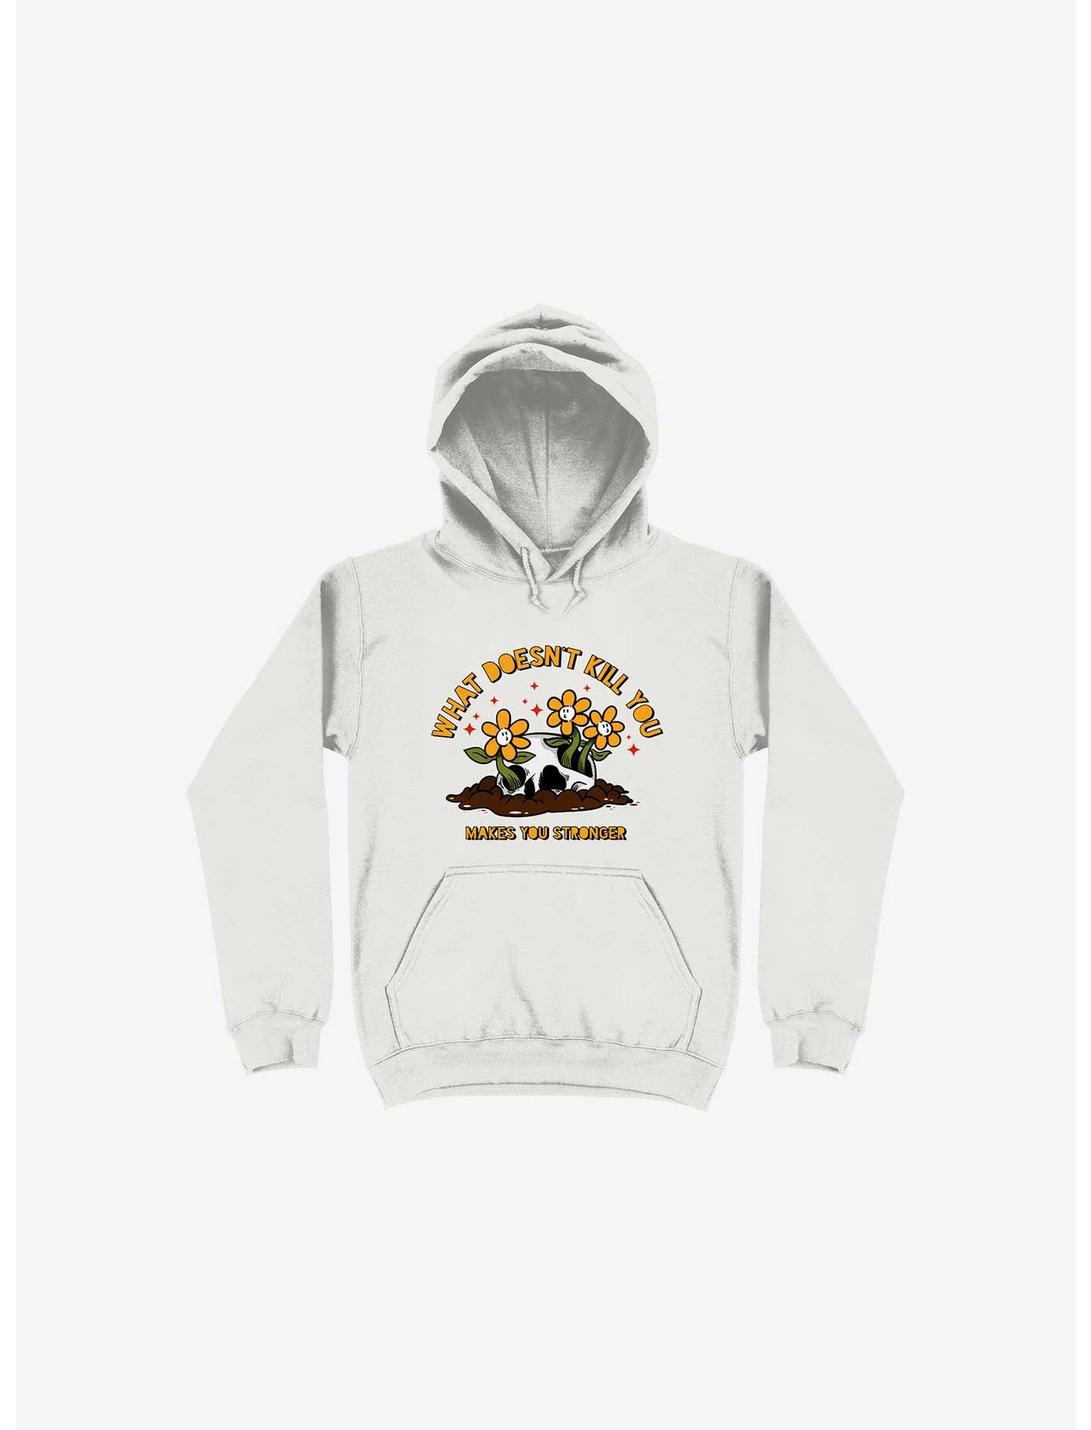 What Doesn't Kill You Makes You Stronger Hoodie, WHITE, hi-res